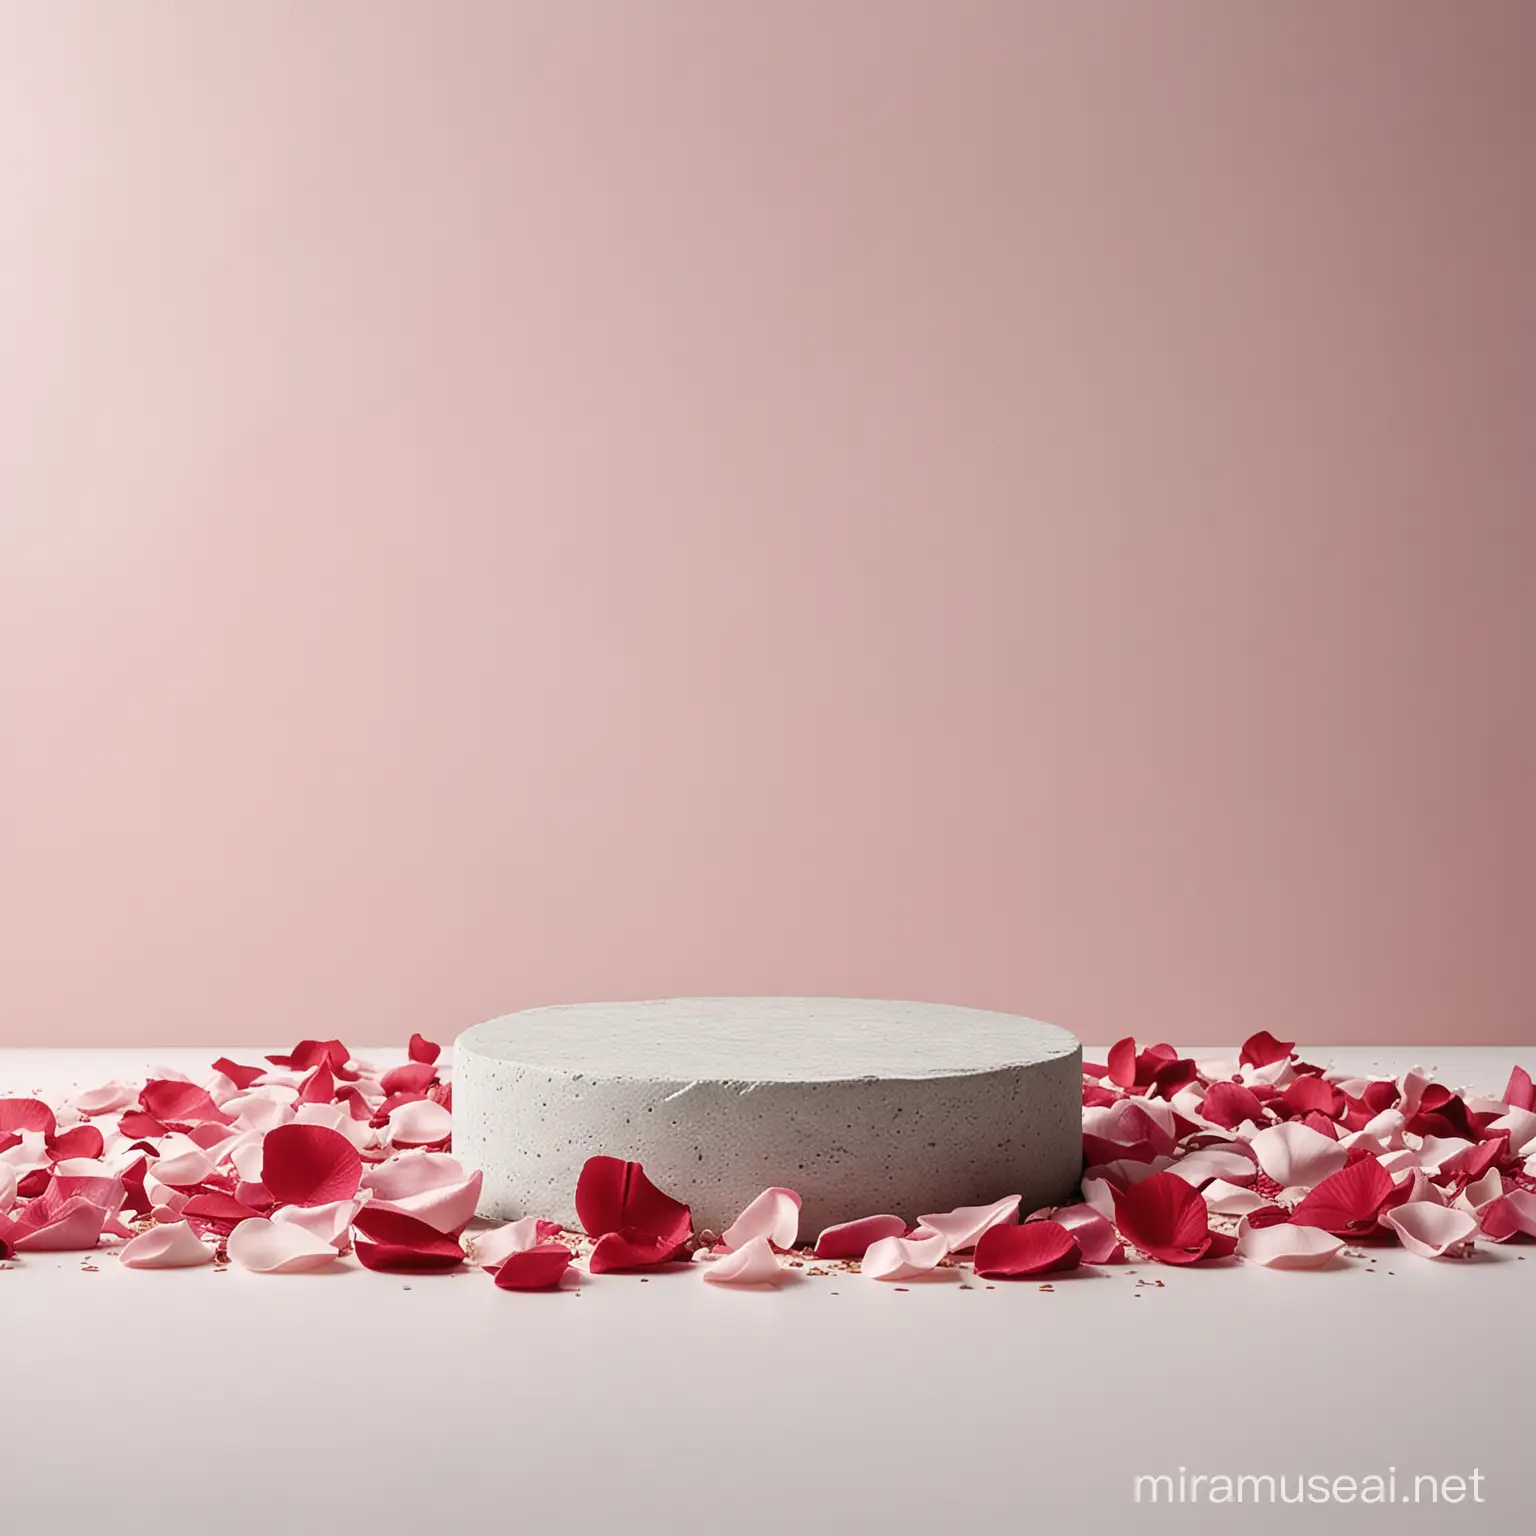 Realistic Cosmetic Product Shoot with Stone Base and Rose Petals